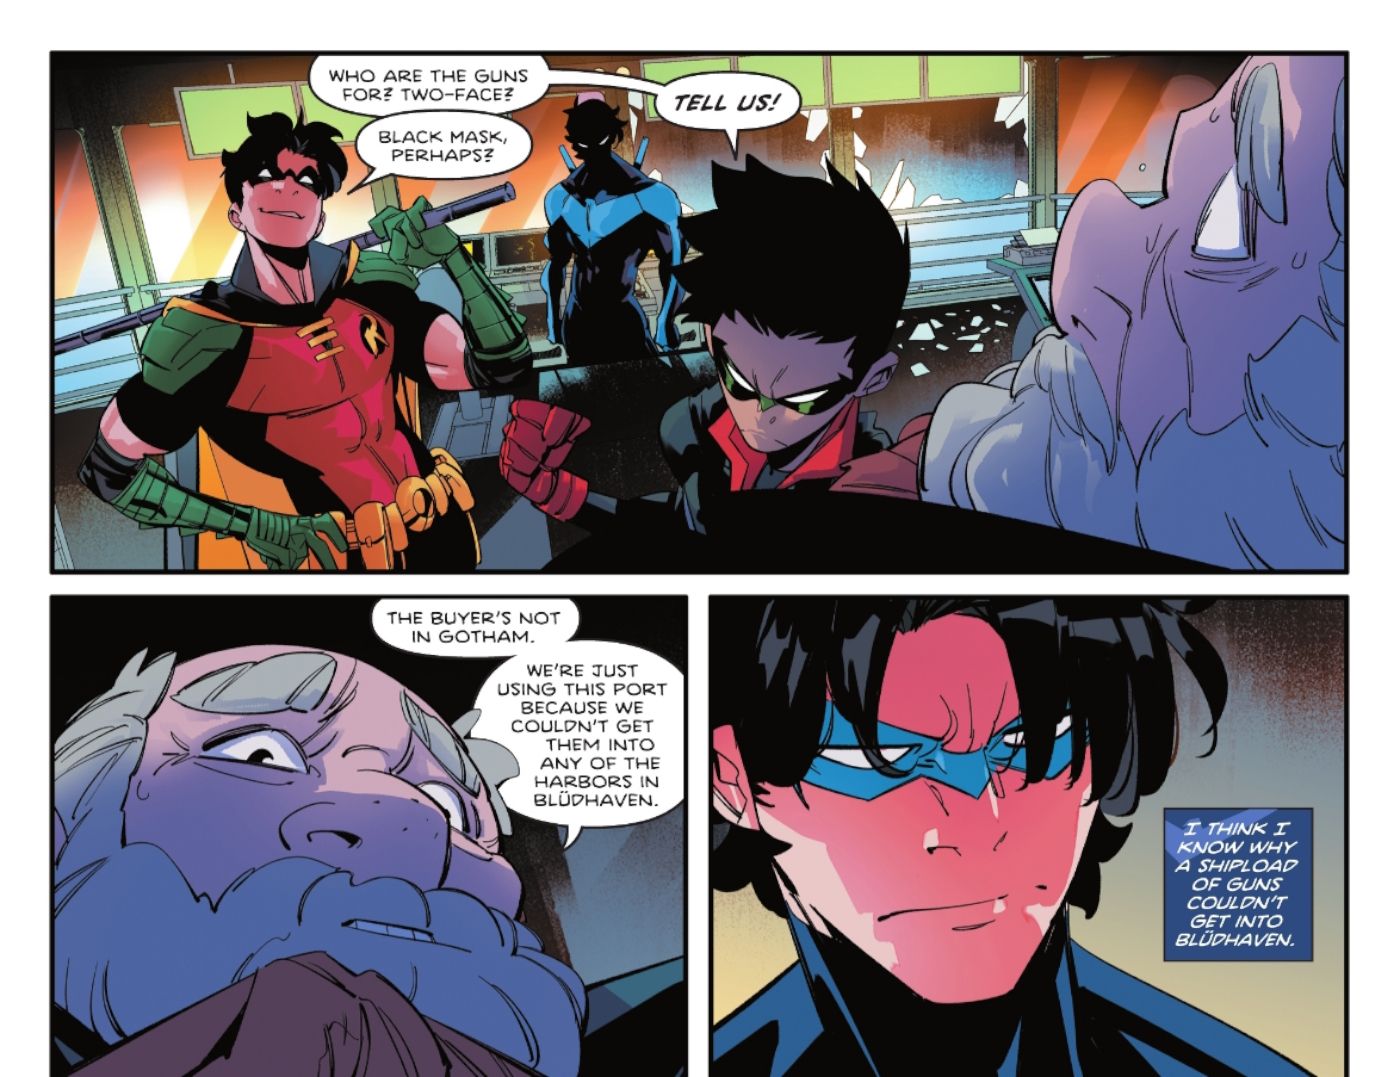 Comic book panels: two Robins interrogate a man with a grey beard as Nightwing watches.